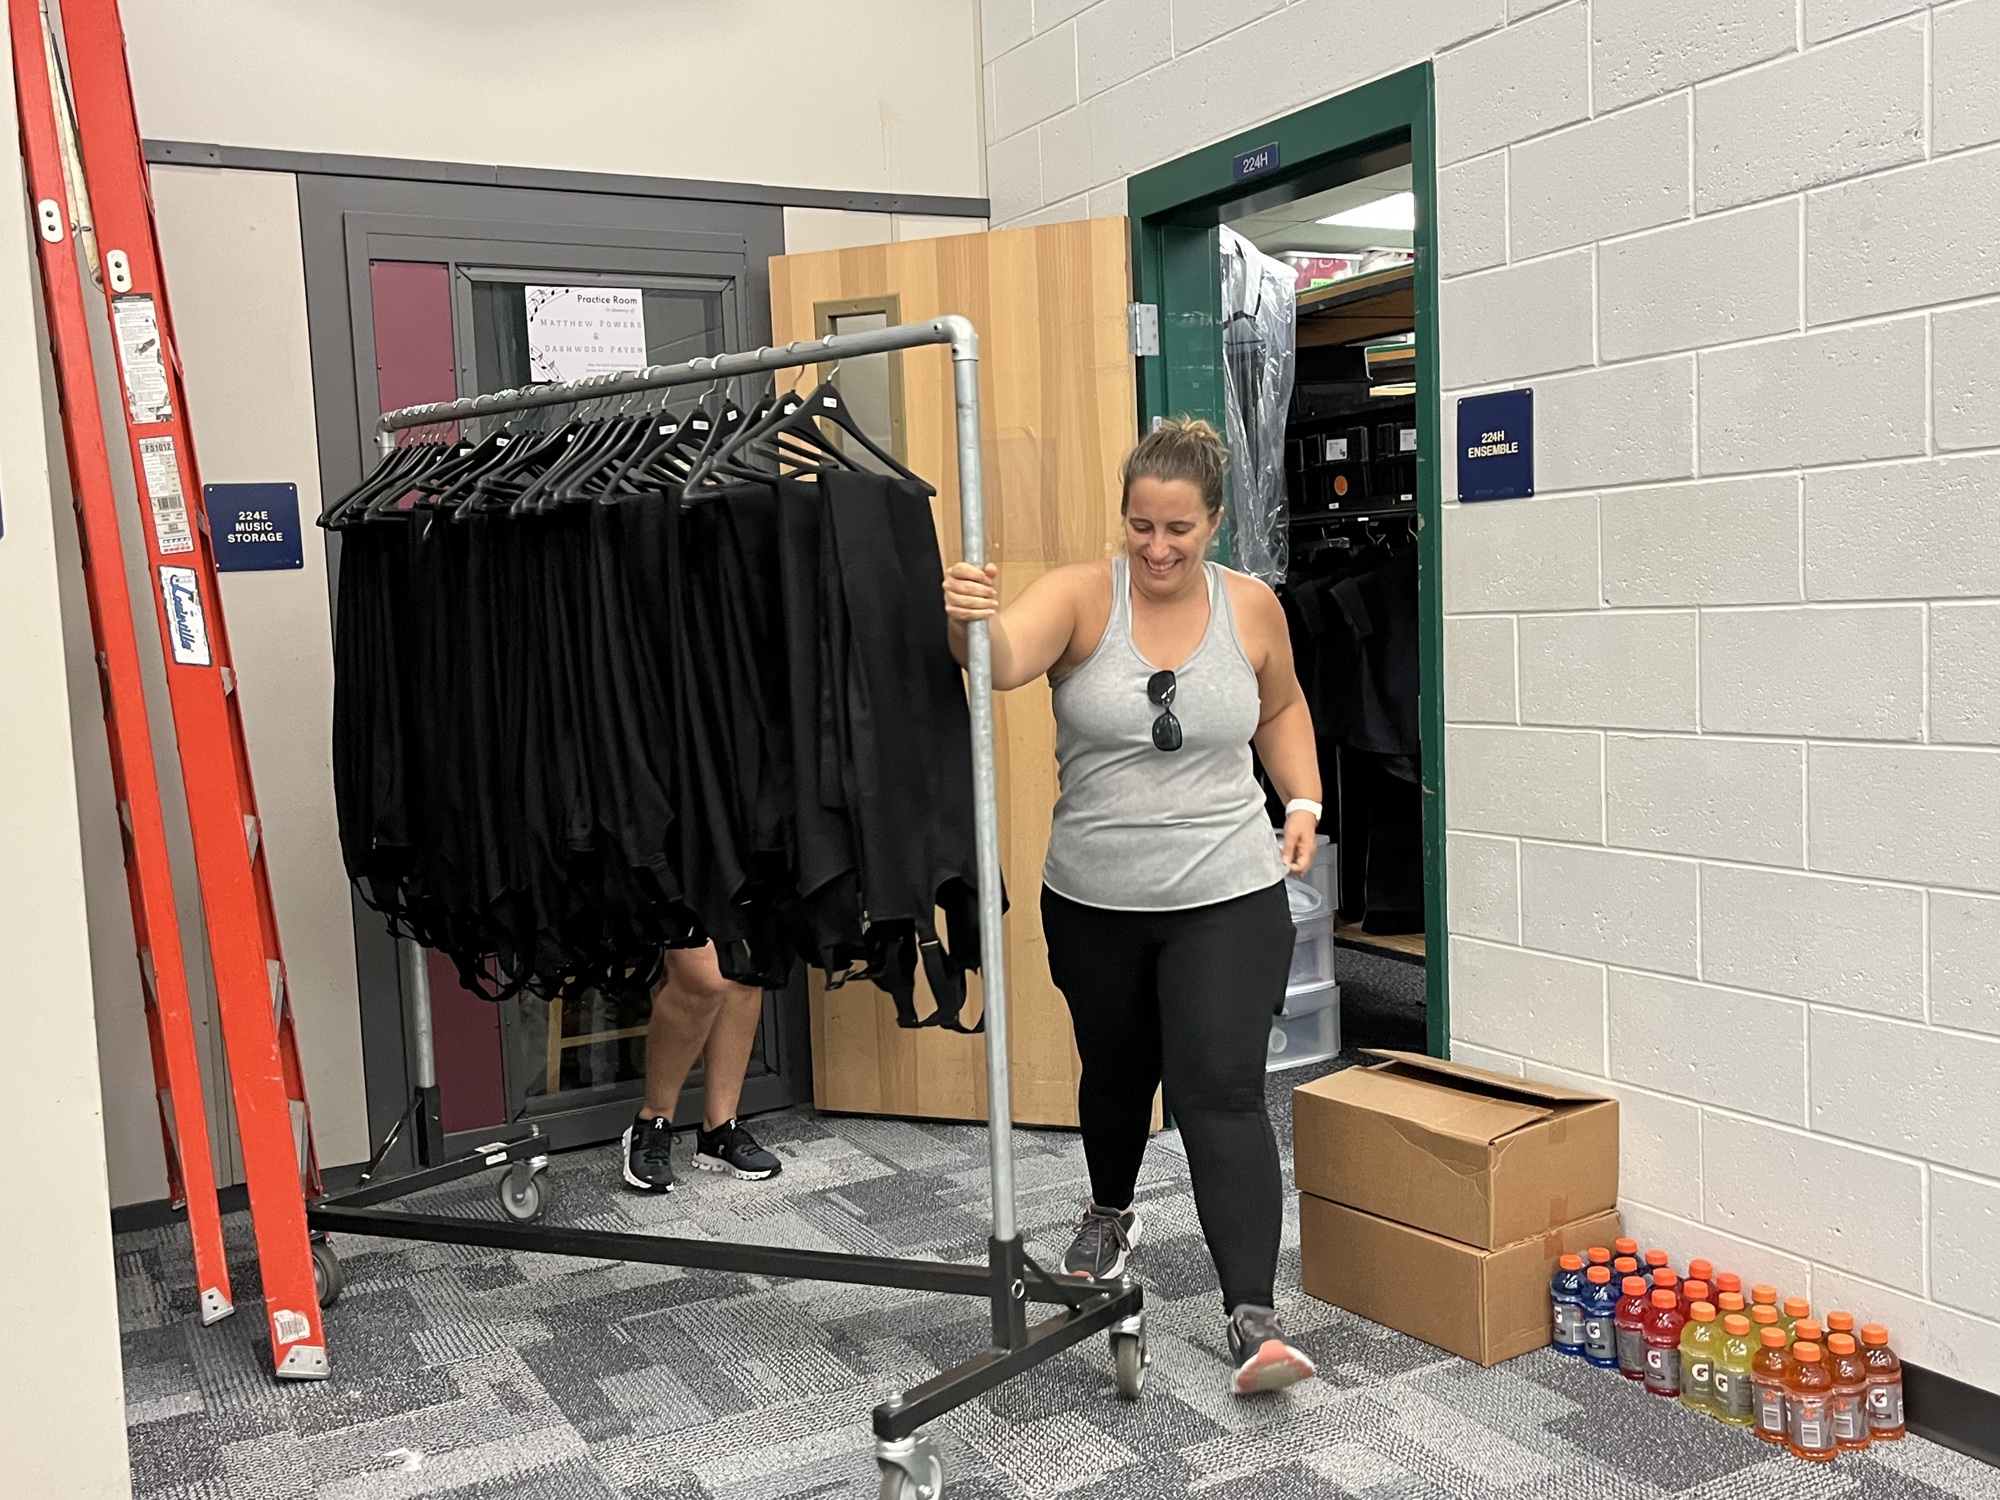 Nicole McCoy, a Lakewood Ranch High School marching band parent, brings uniforms out to the band room to make it easier for band members to have access. (Photos by Liz Ramos)